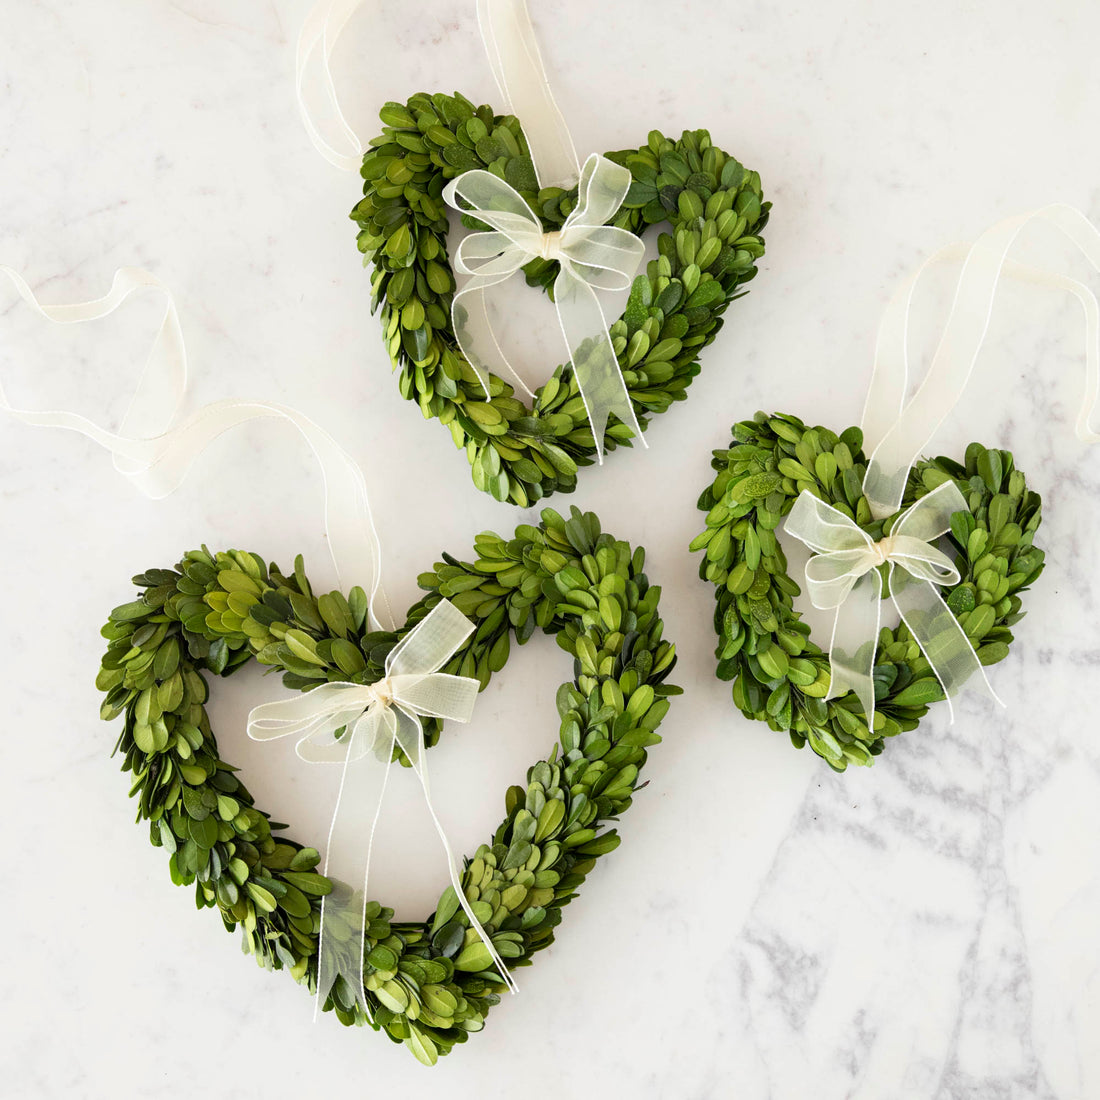 Three heart-shaped preserved Boxwood Wreath Hearts with Ribbons by Mills Floral Company on a white background.